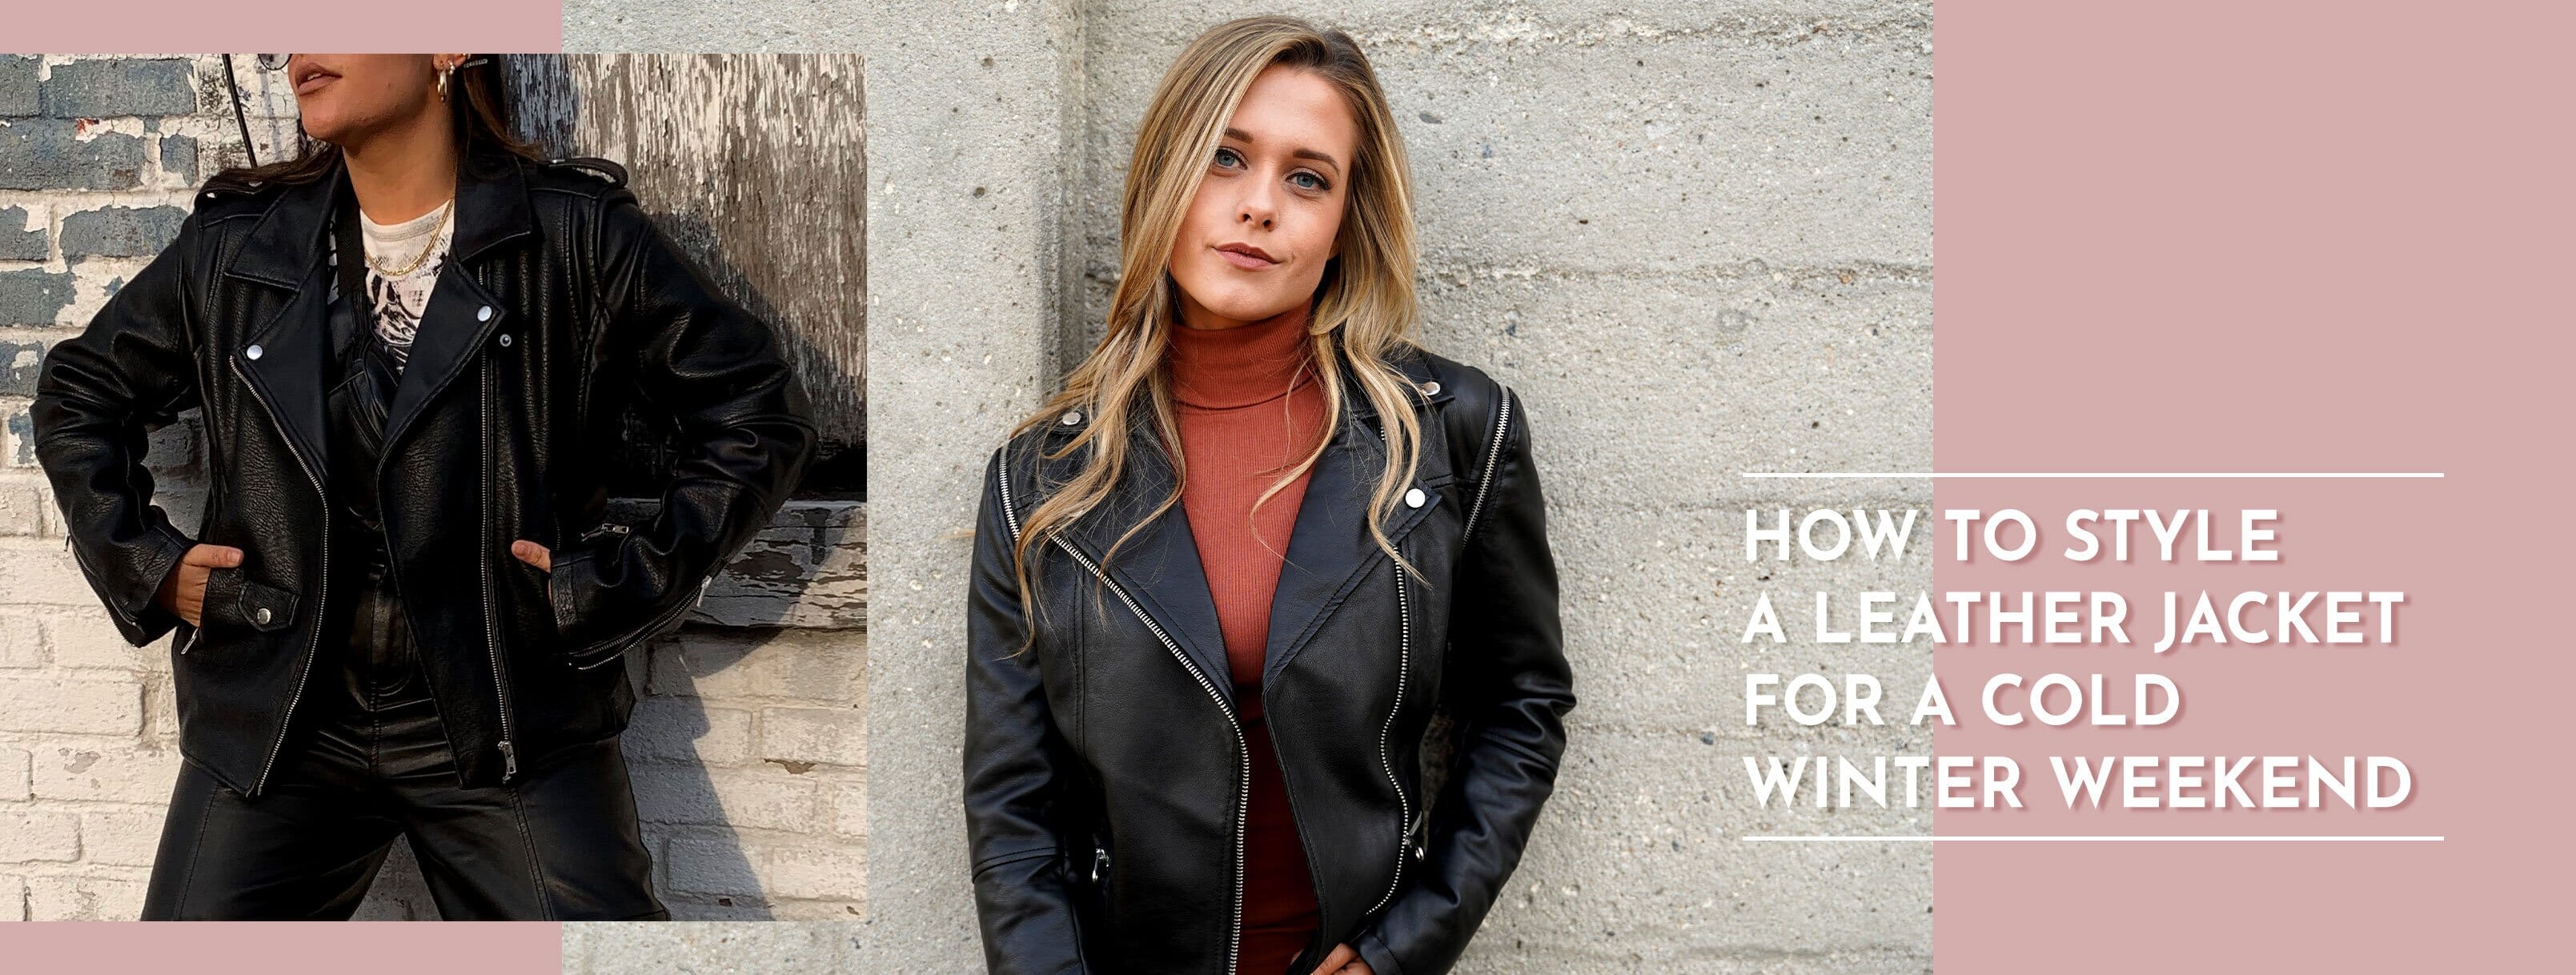 How to Style a Leather Jacket for a Cold Winter Weekend